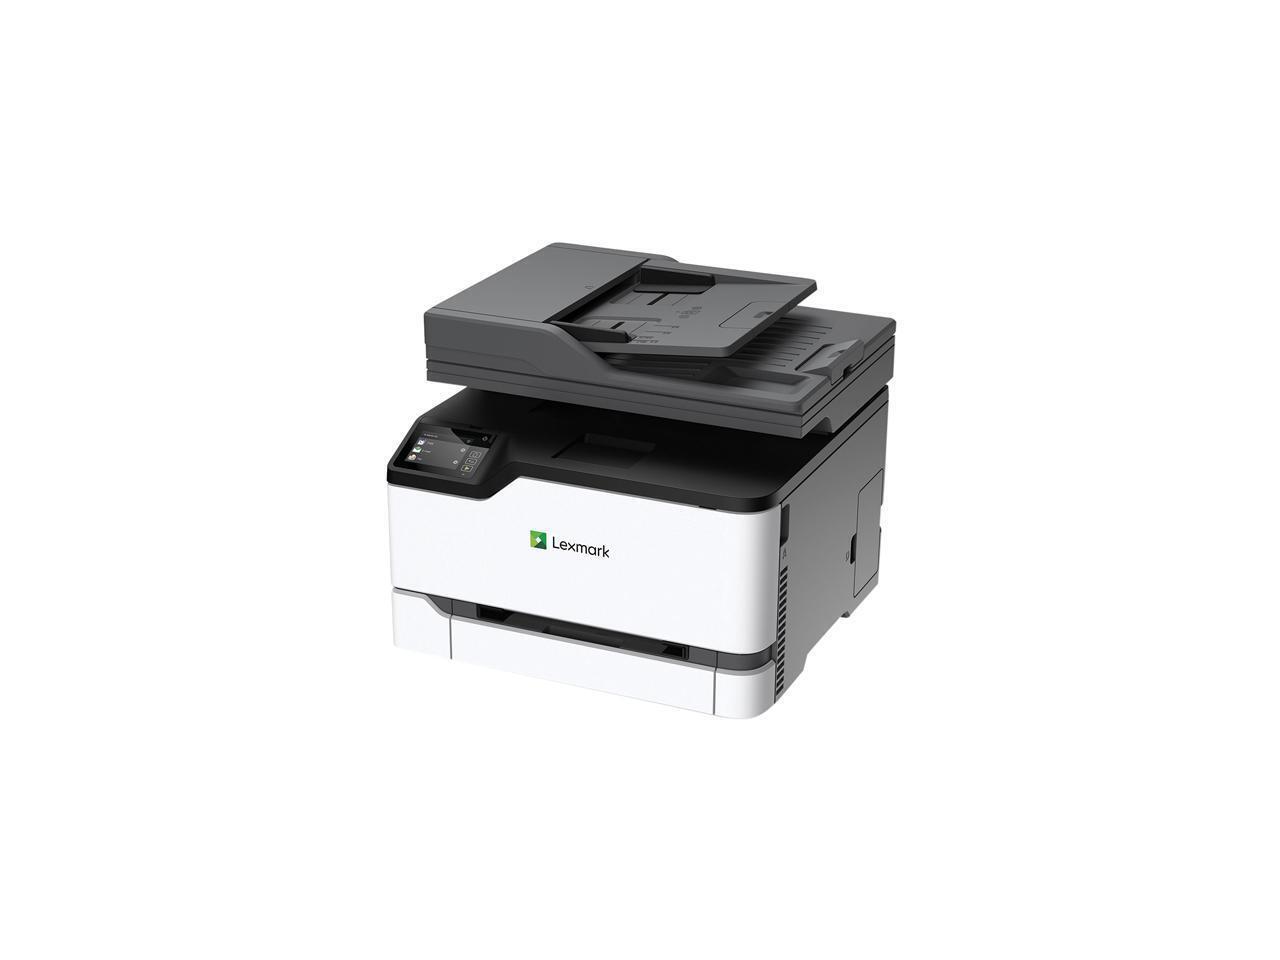 Lexmark CX331ADWE Small-Medium Workgroup Up to 26 ppm 600 x 600 dpi, 4800 Color